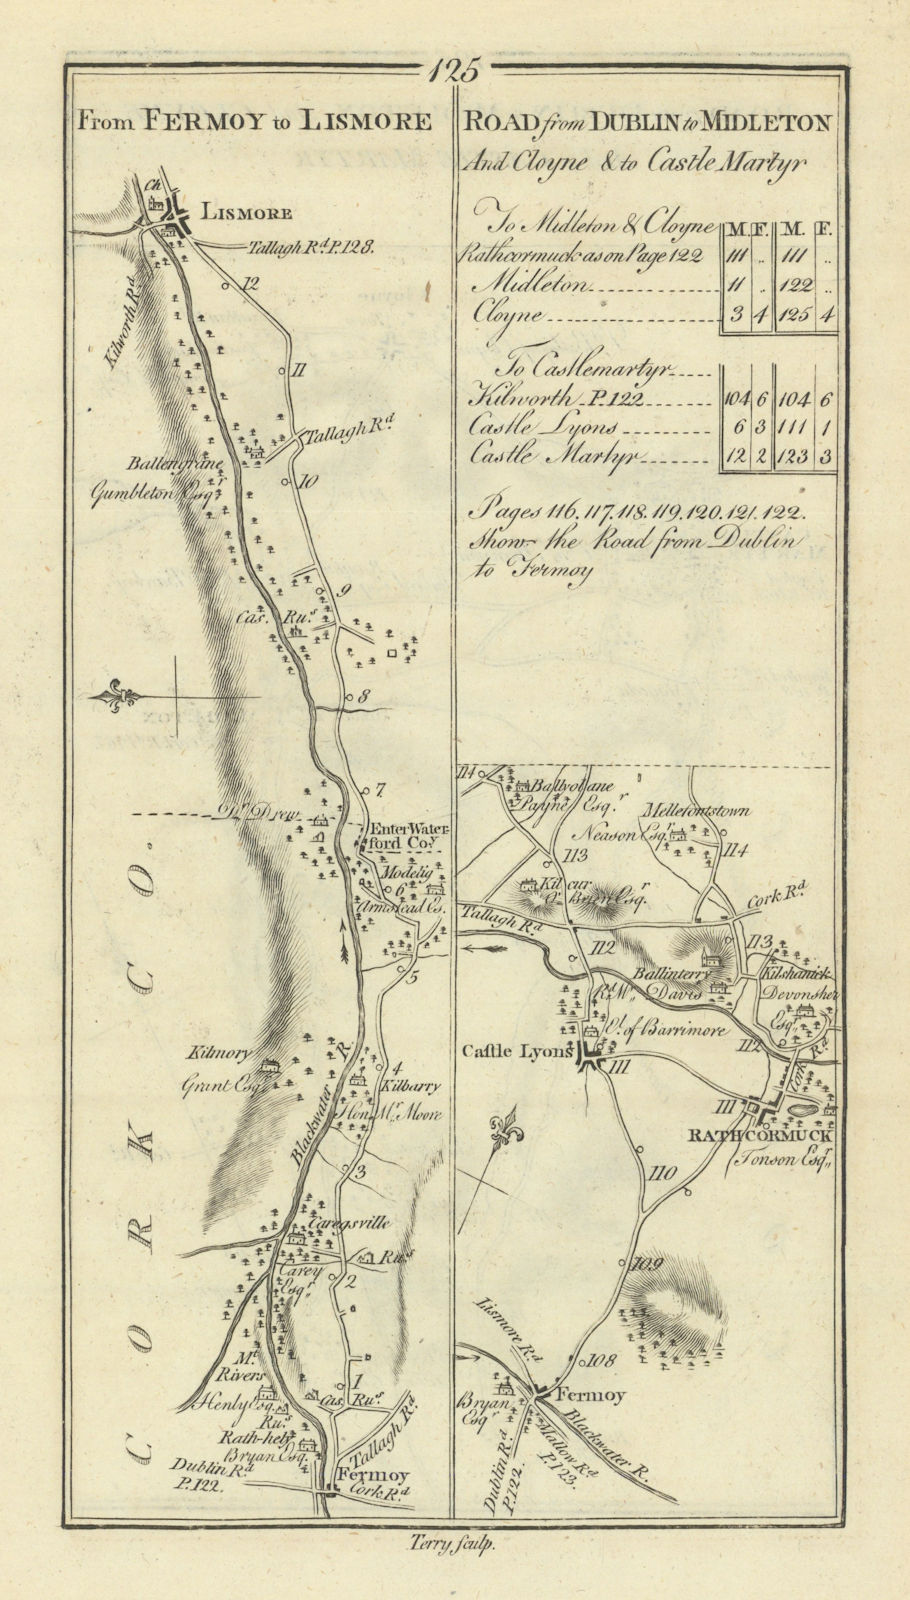 Associate Product #125 Fermoy to Lismore, Rathcormac & Castlelyons. Cork. TAYLOR/SKINNER 1778 map